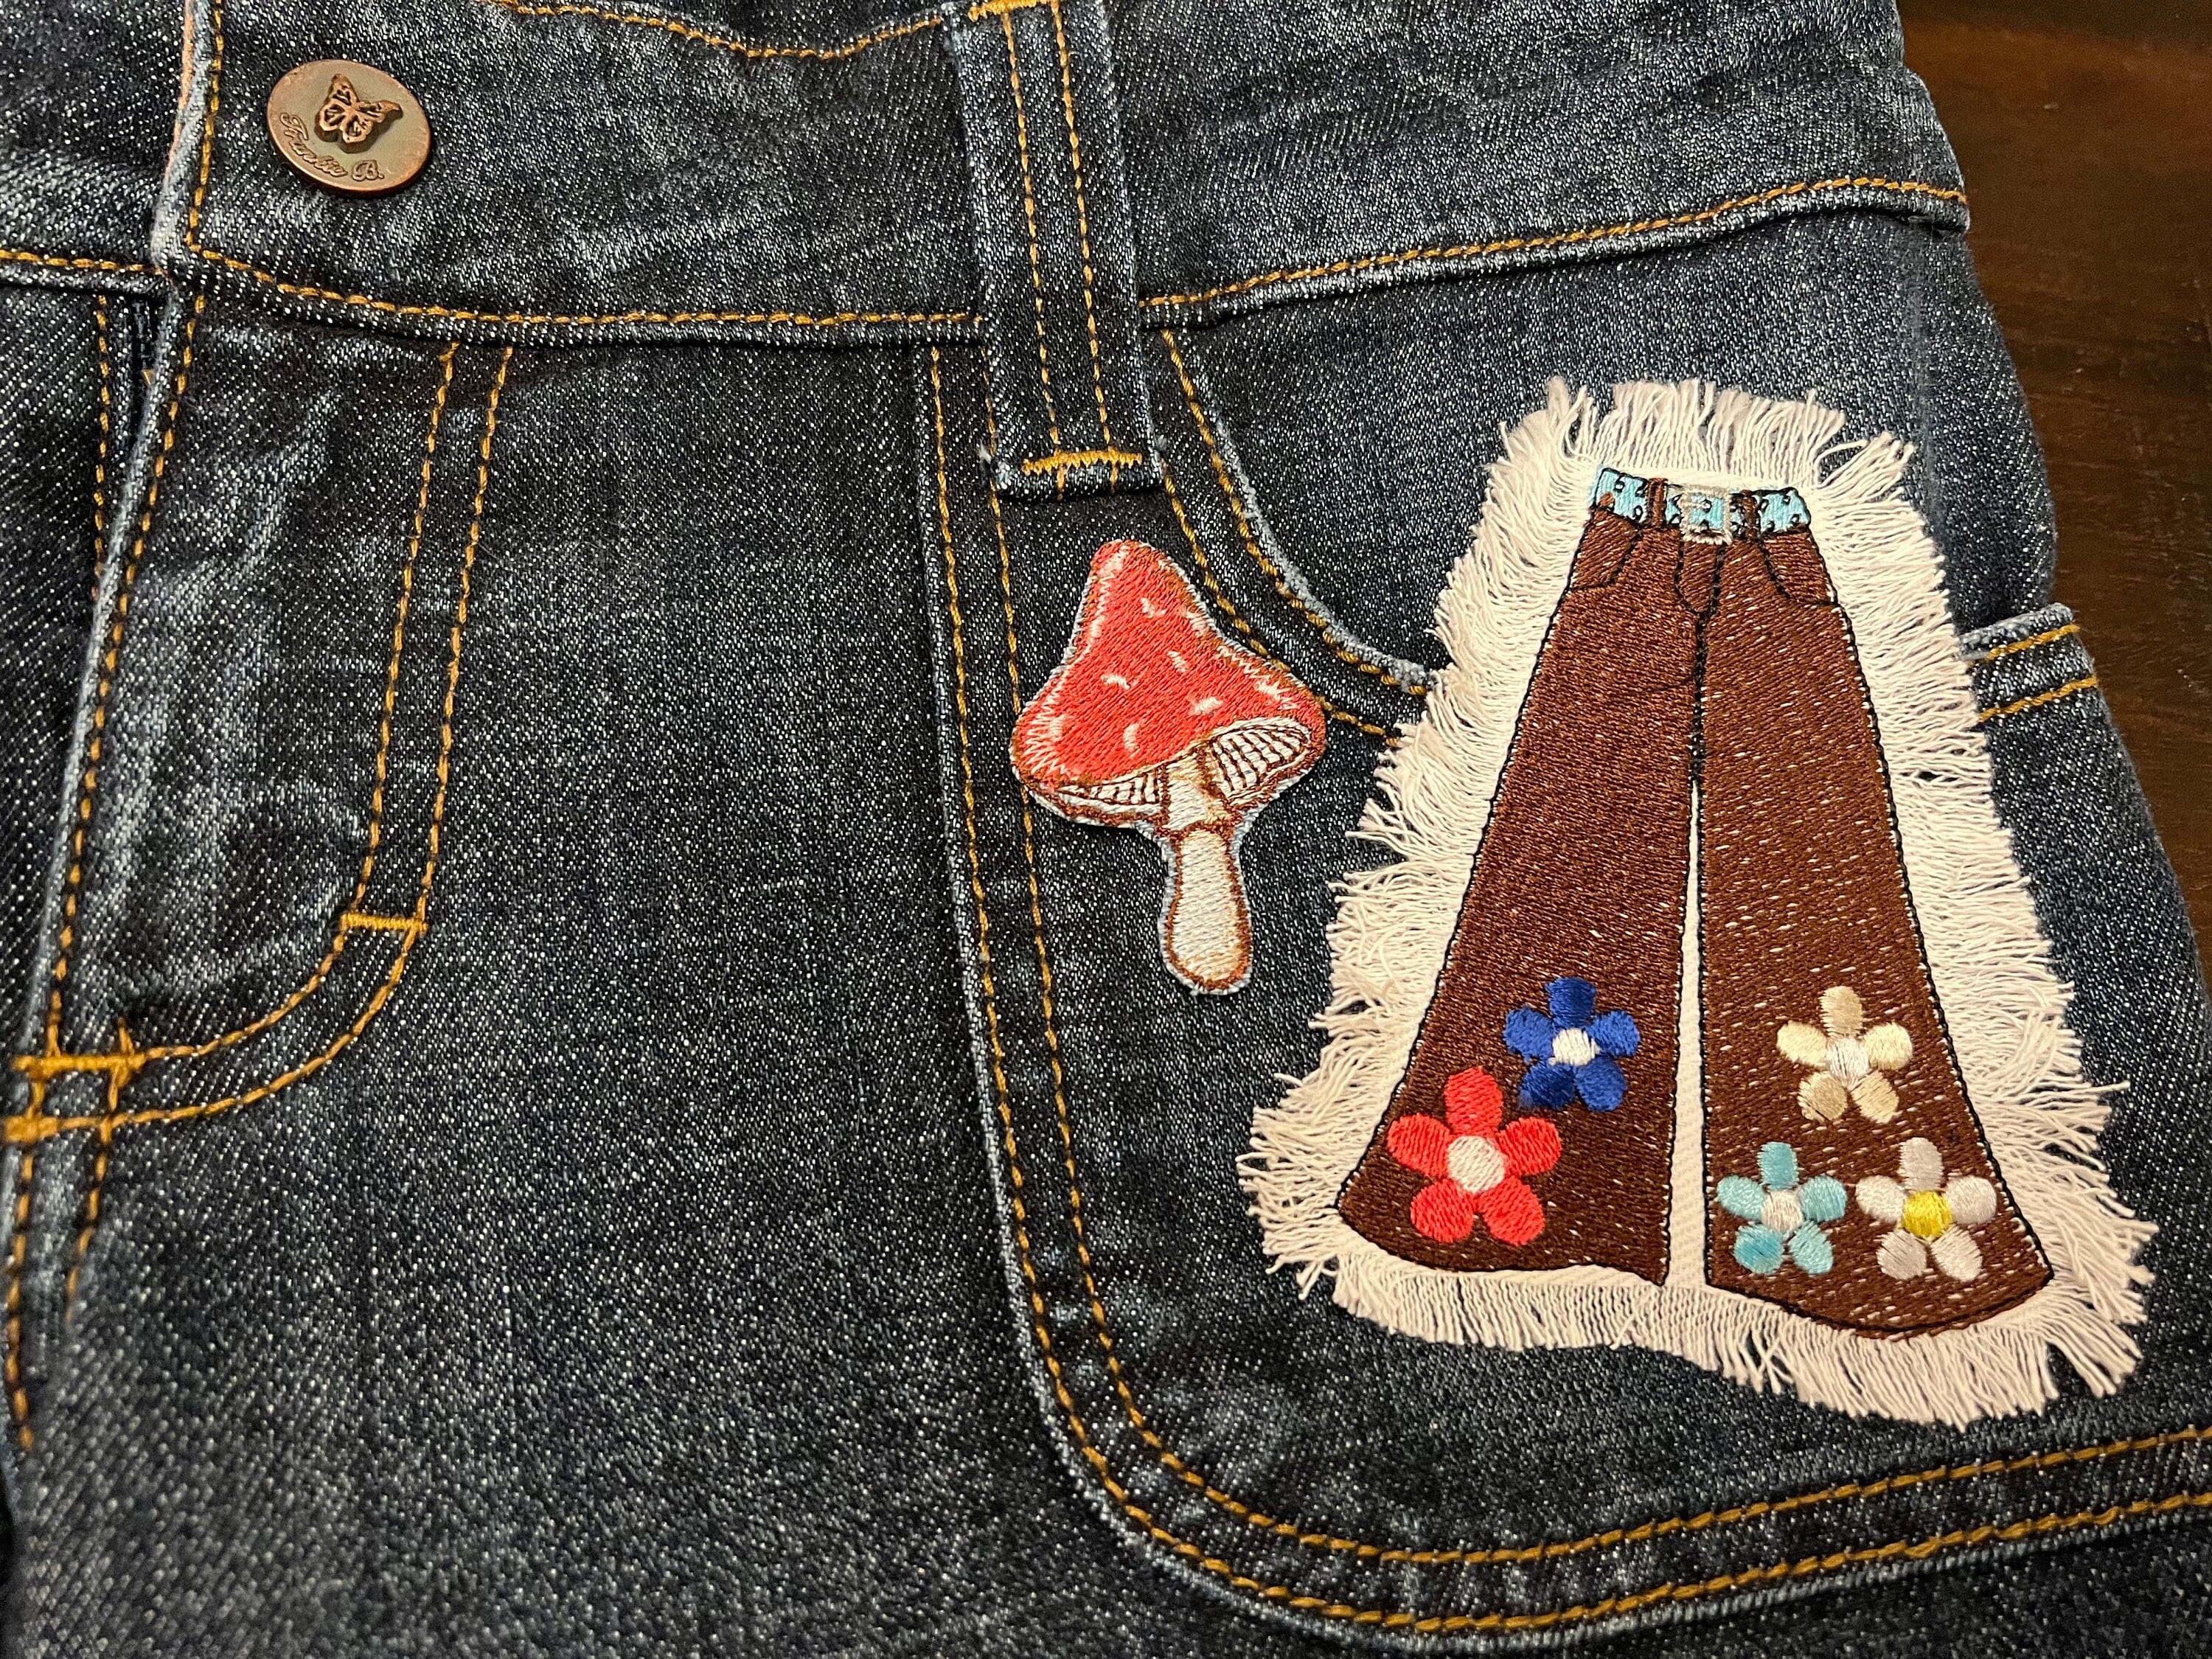 Hippie Icon Pants SOULE PATCH DENIM Handmade Patch Embroidered Flowers large Iron On Decal Frayed edges 60s 70s classic flower power Appliques & Patches